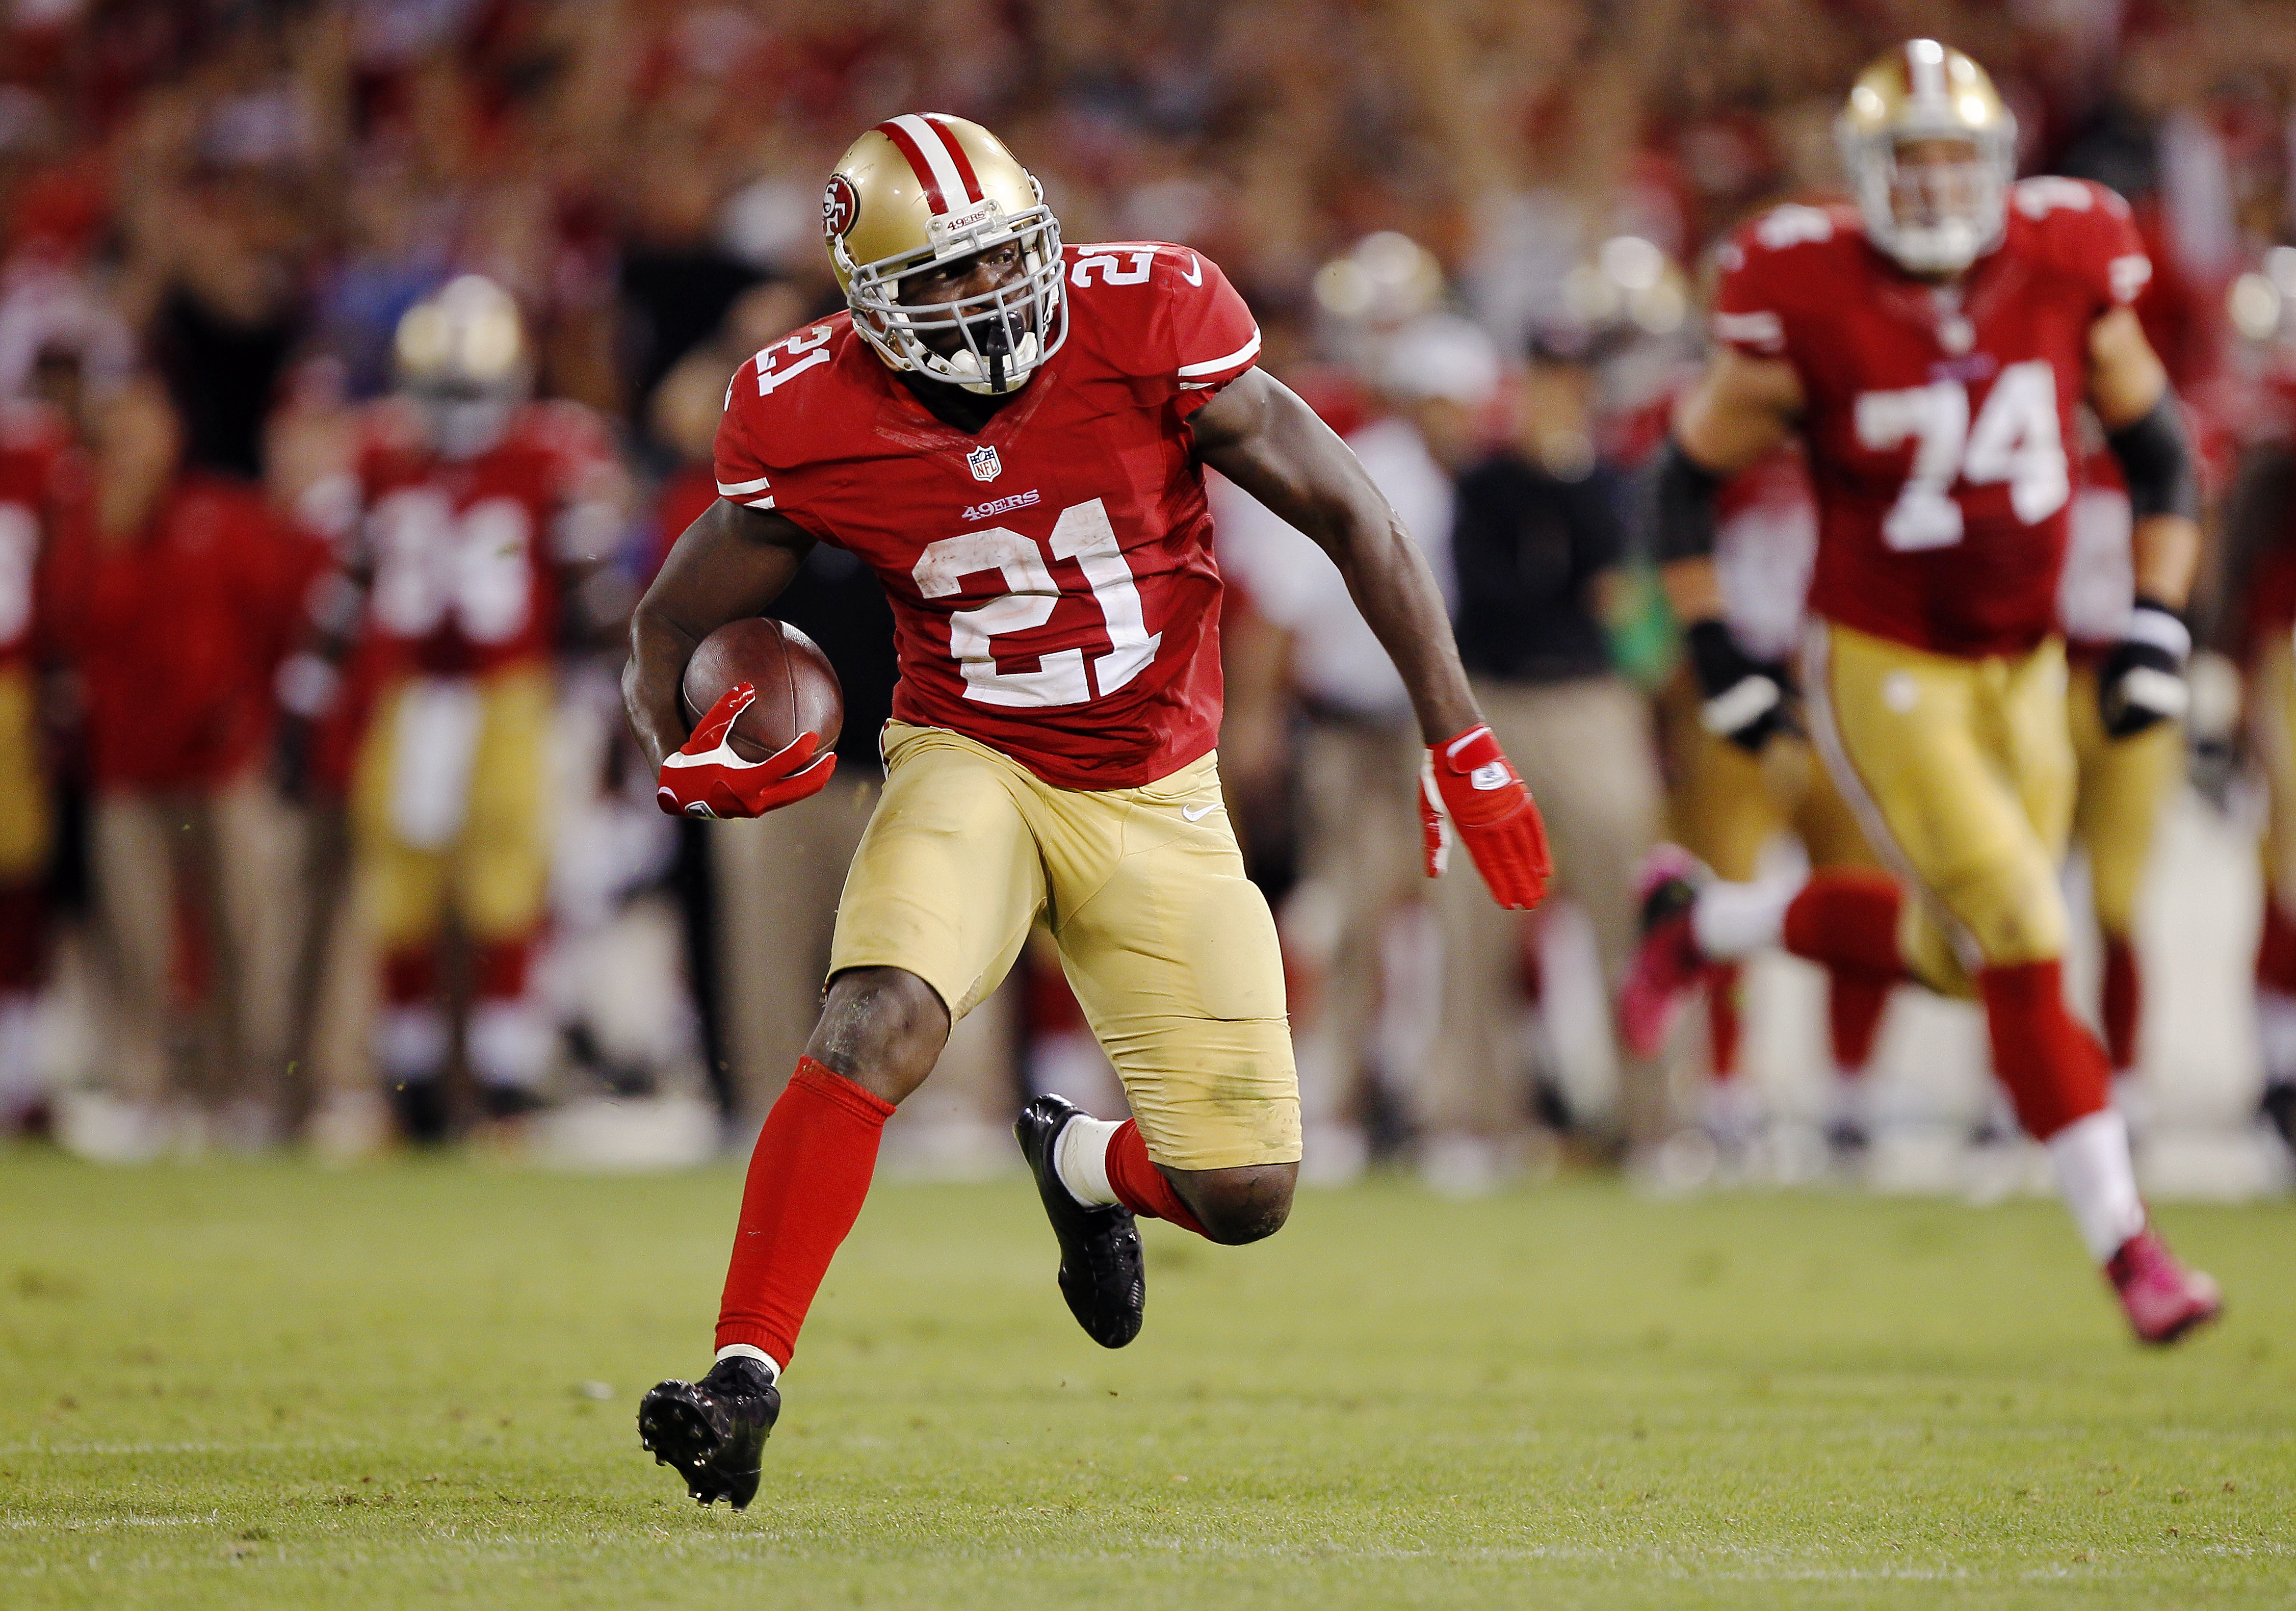 Frank Gore Wallpapers High Quality | Download Free4504 x 3160